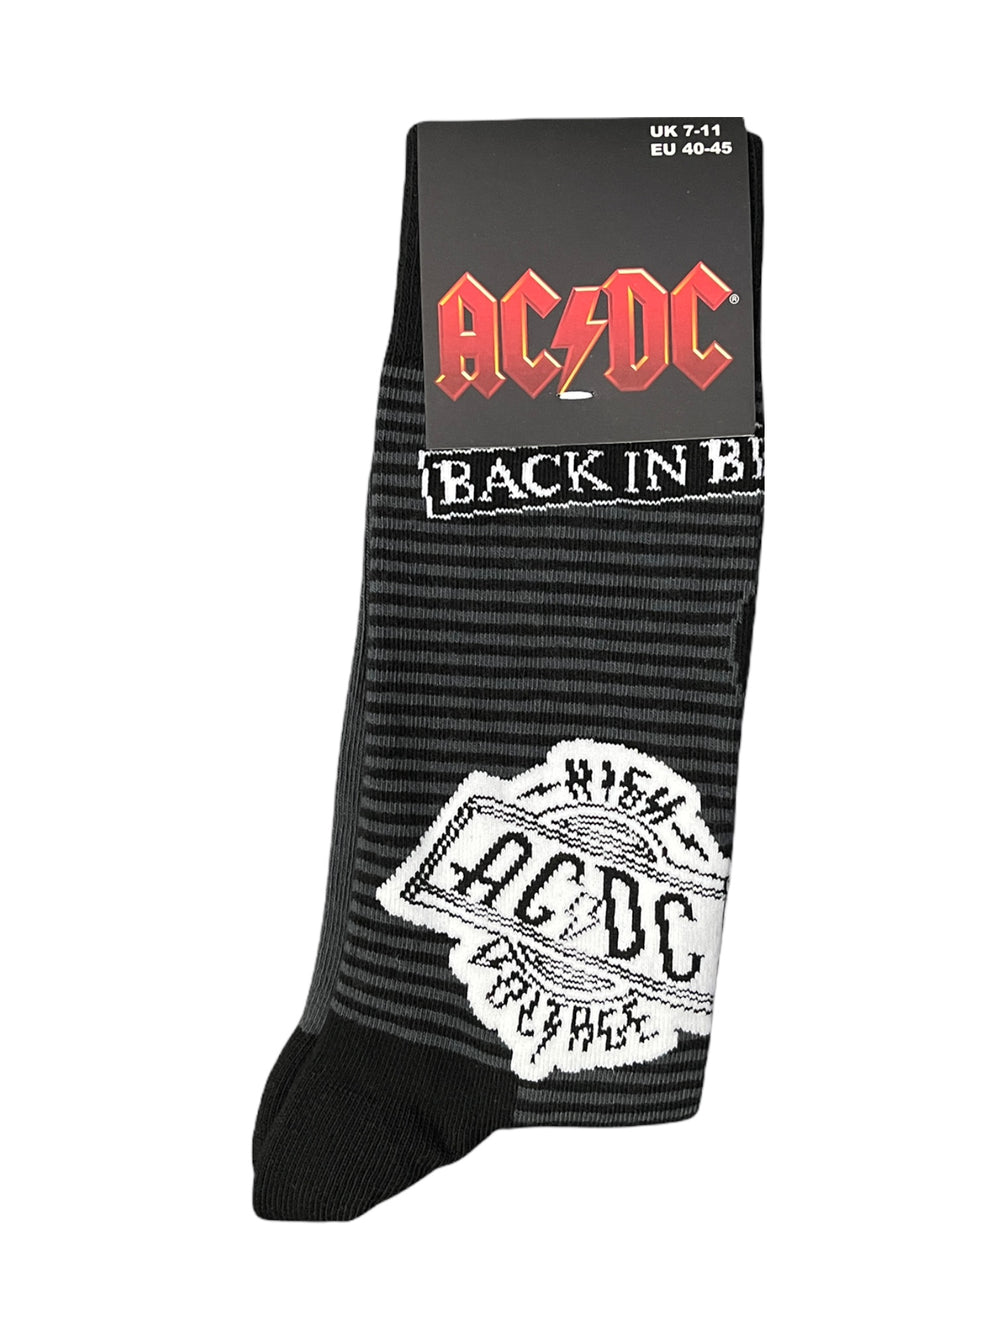 AC/DC Icons Official Product 1 Pair Jacquard Socks Brand New